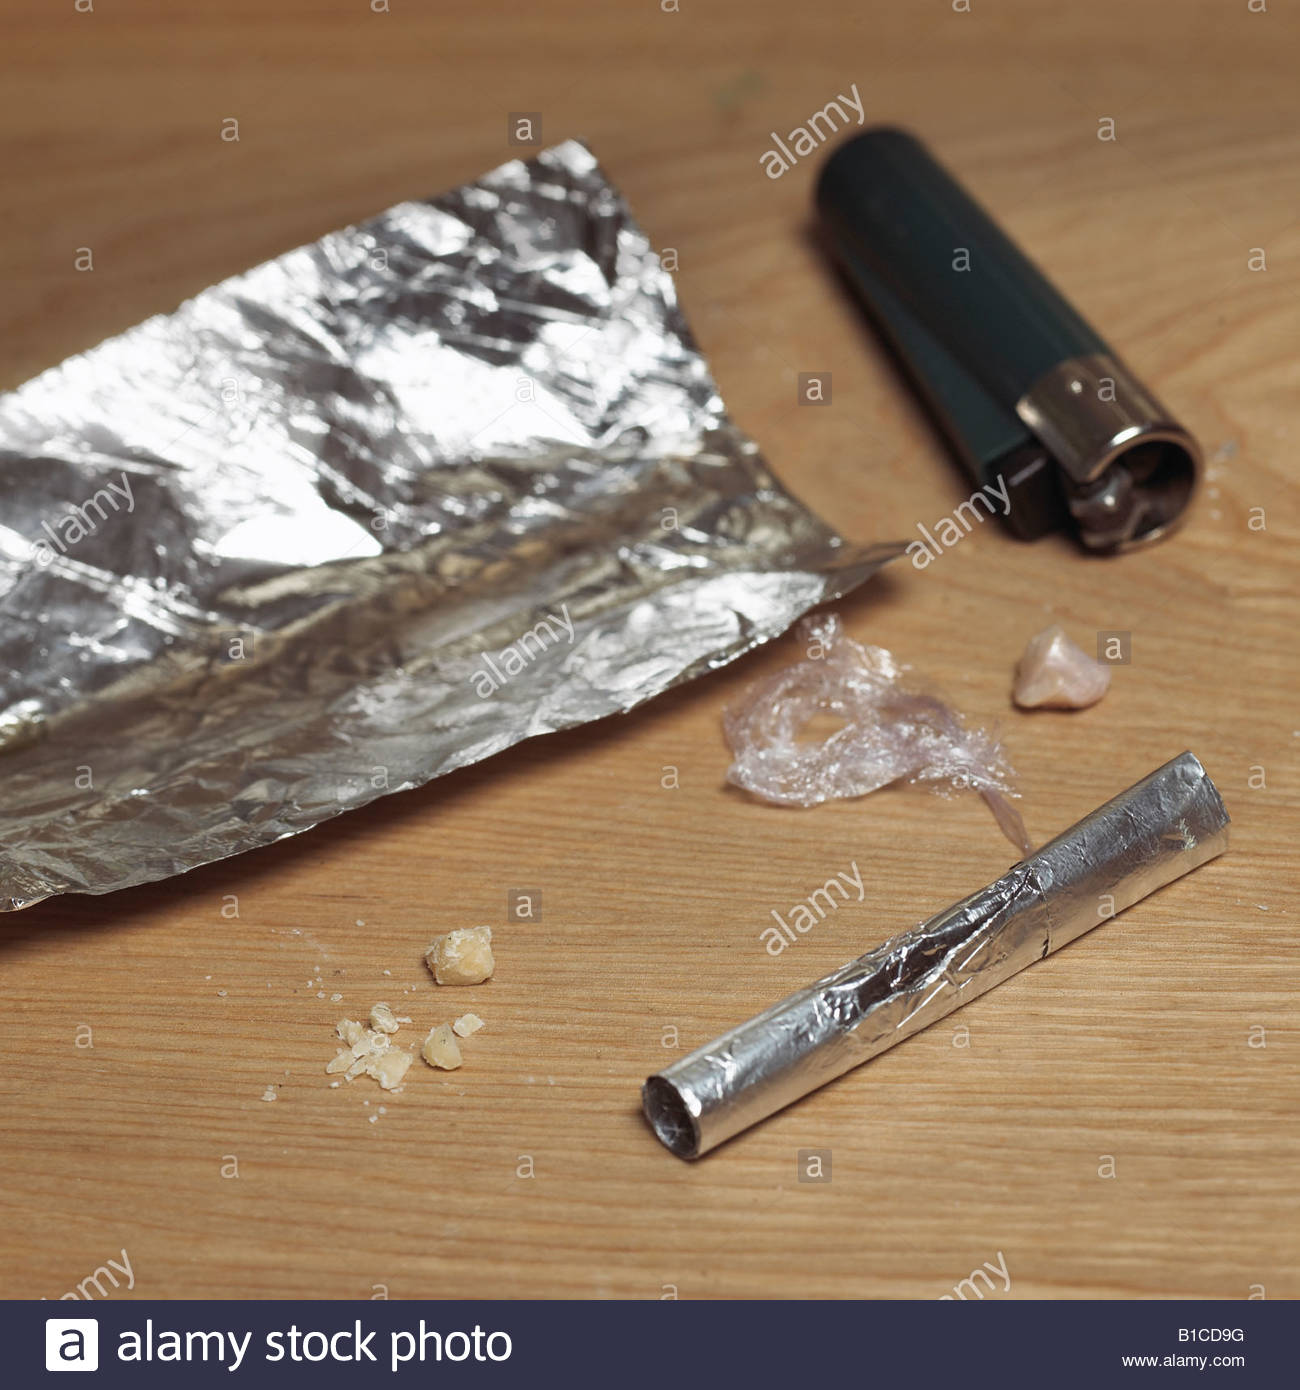 how to smoke crack with foil